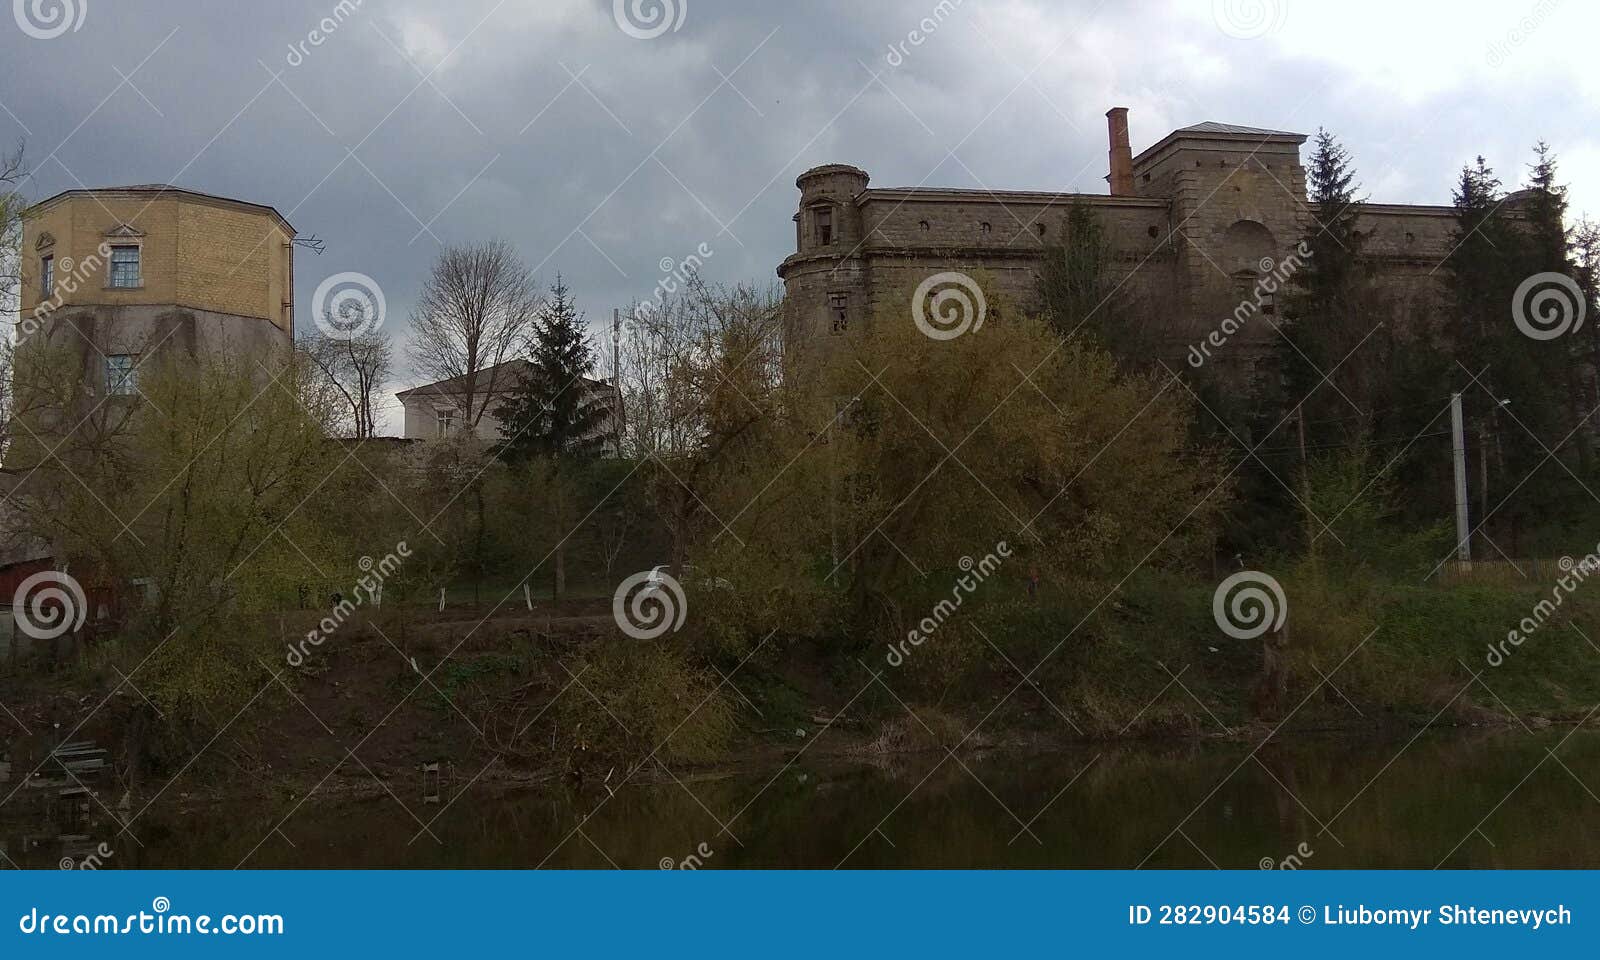 ukraine, khmilnyk, the palace of count xido, the palace and tower of the southern bug